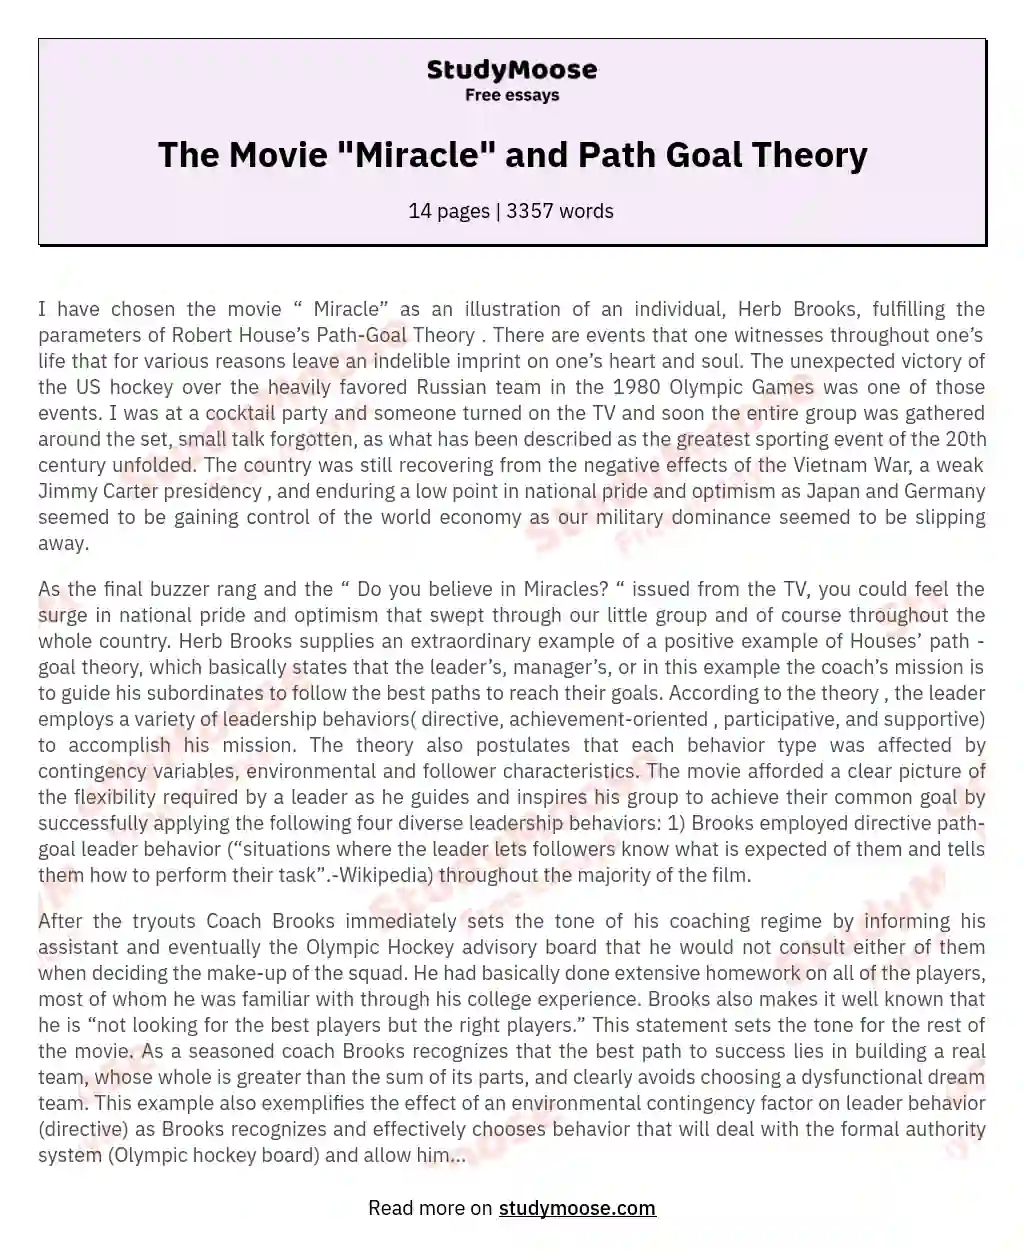 The Movie "Miracle" and Path Goal Theory essay